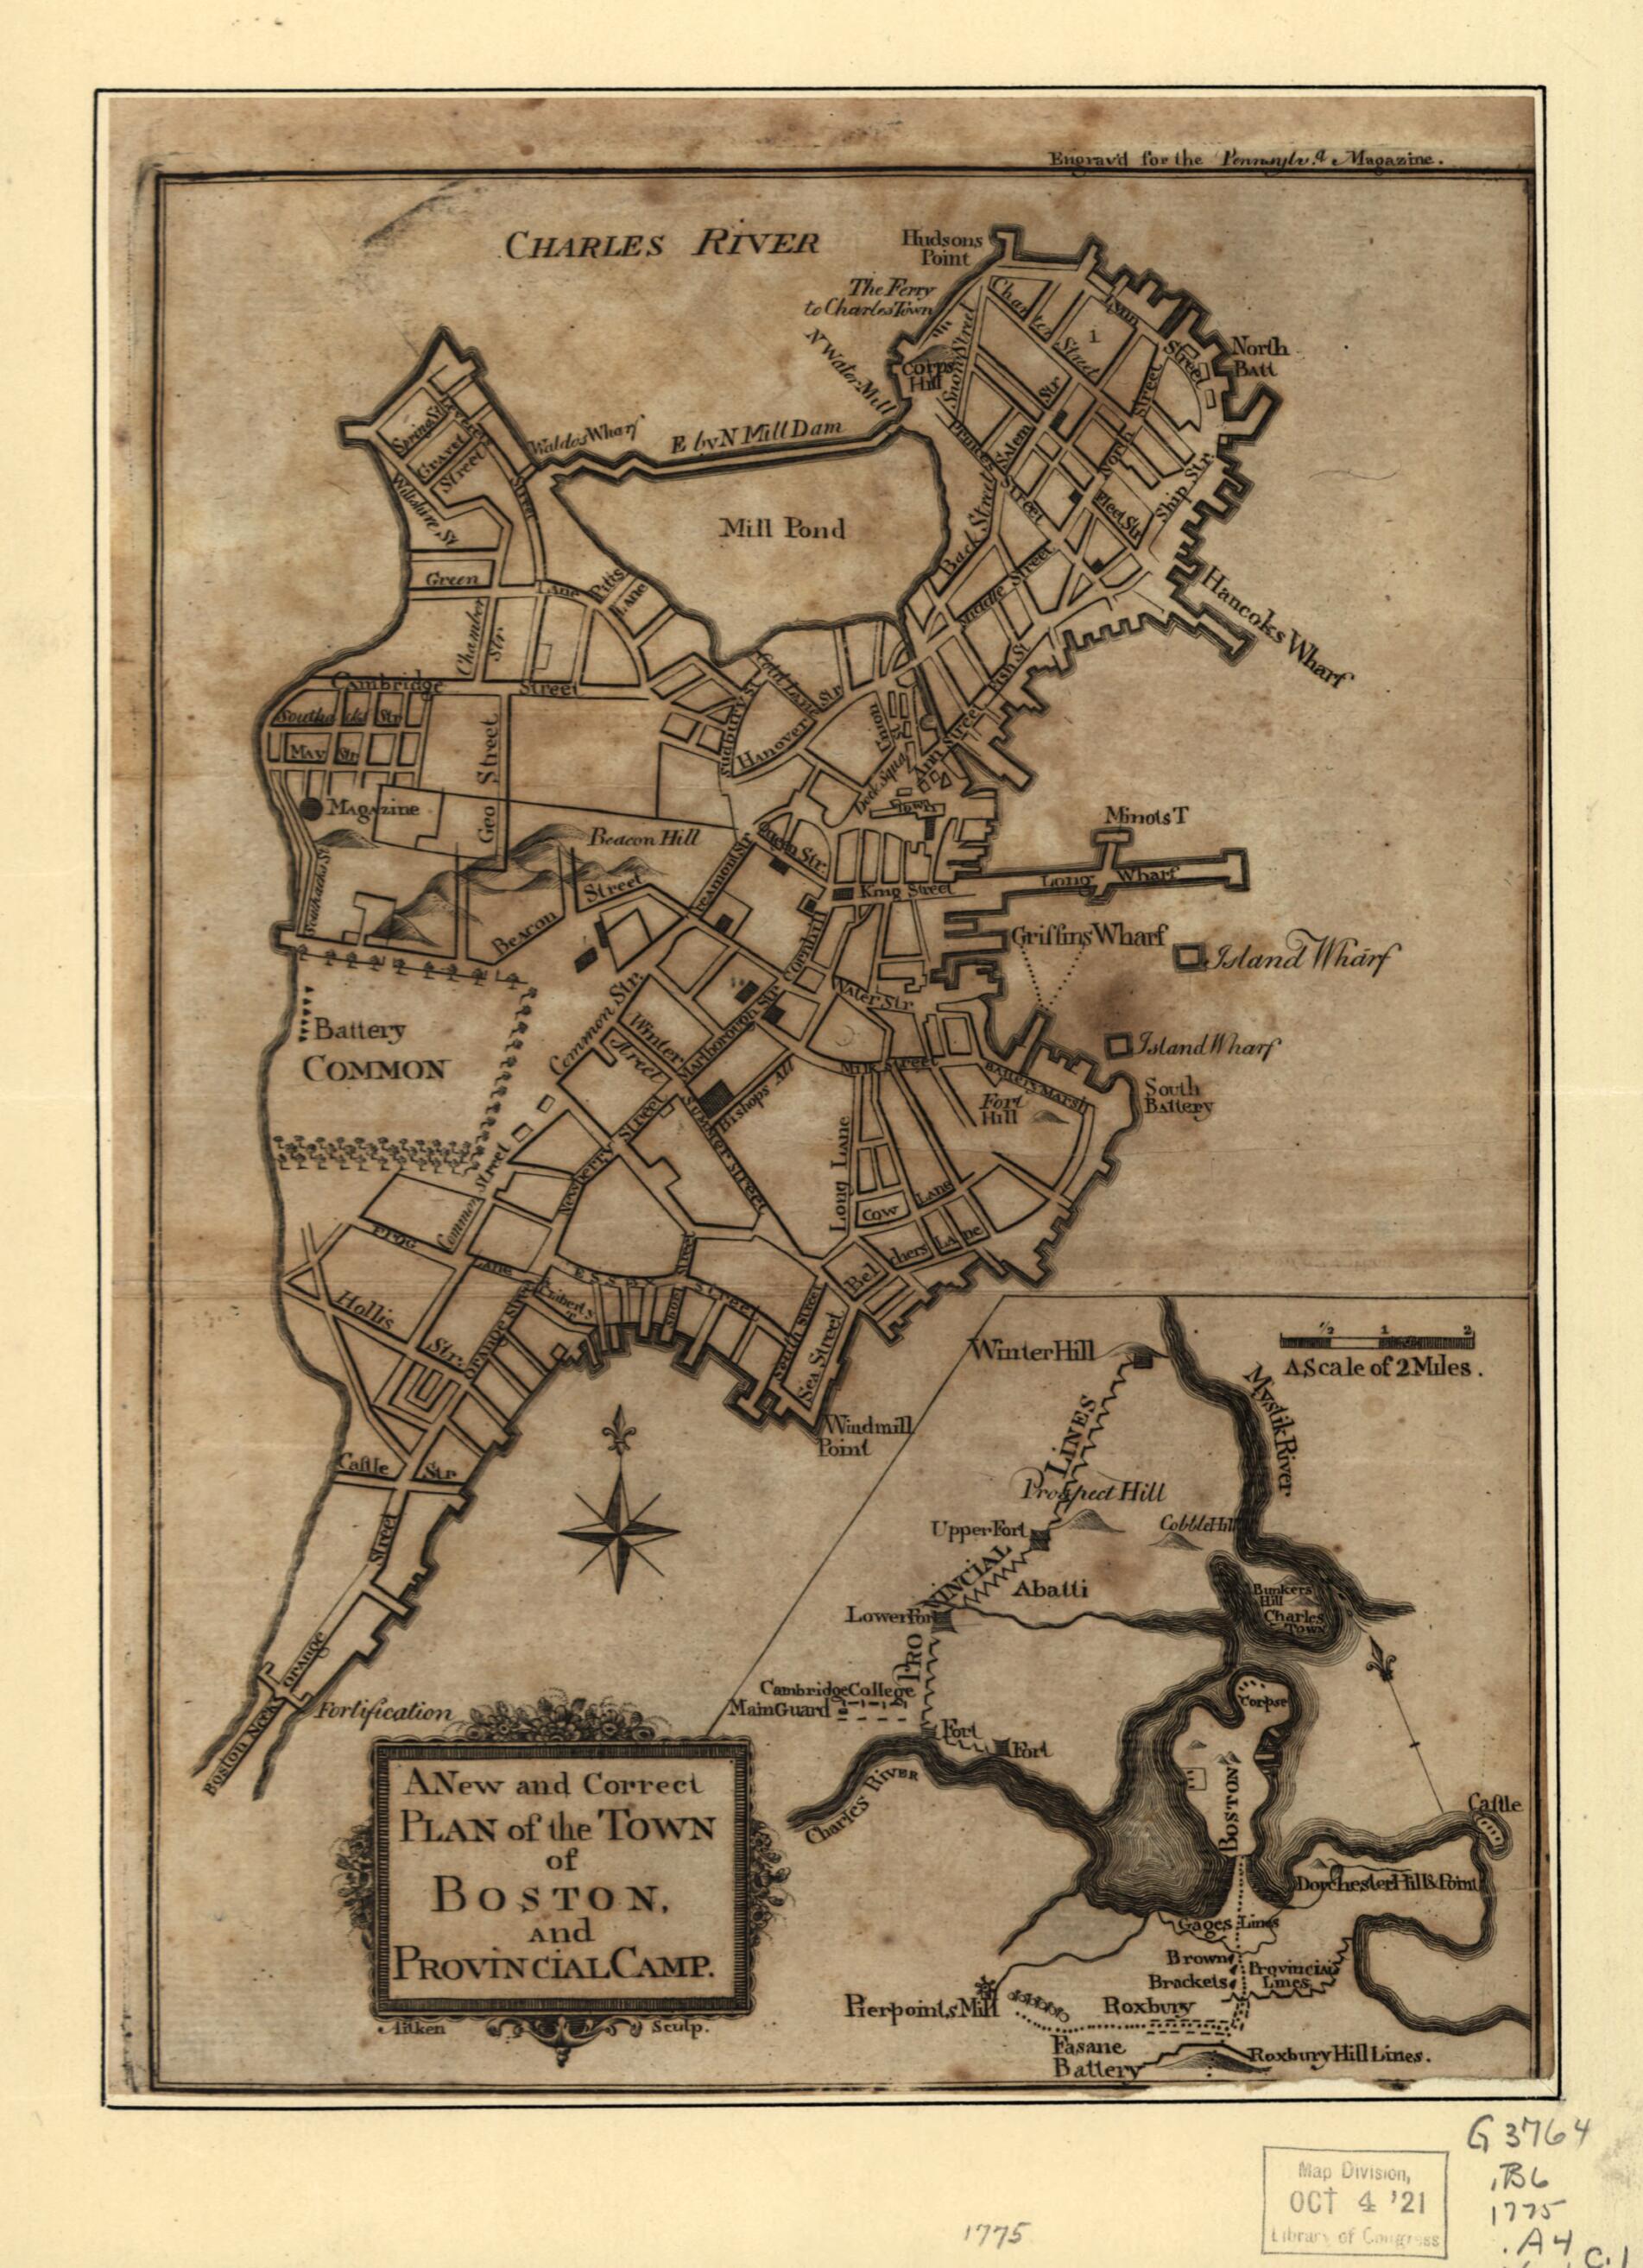 This old map of A New and Correct Plan of the Town of Boston, and Provincial Camp from 1775 was created by Robert Aitken in 1775